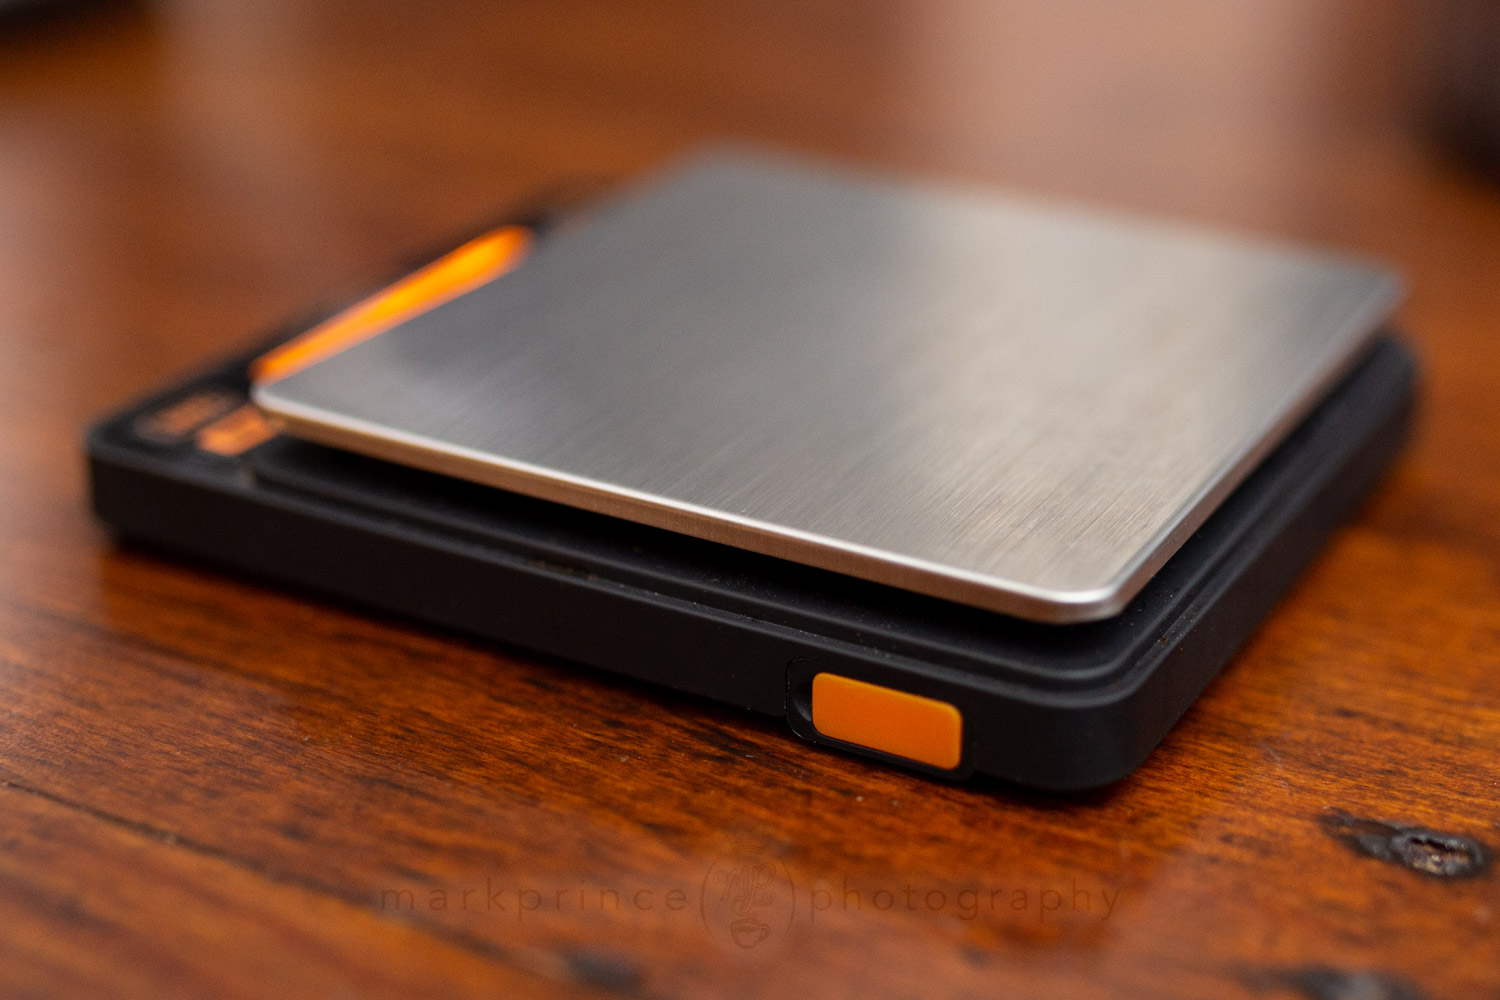 Test Drive—The Coolest Free Coffee Gadgets and Brewista Smart Scale II